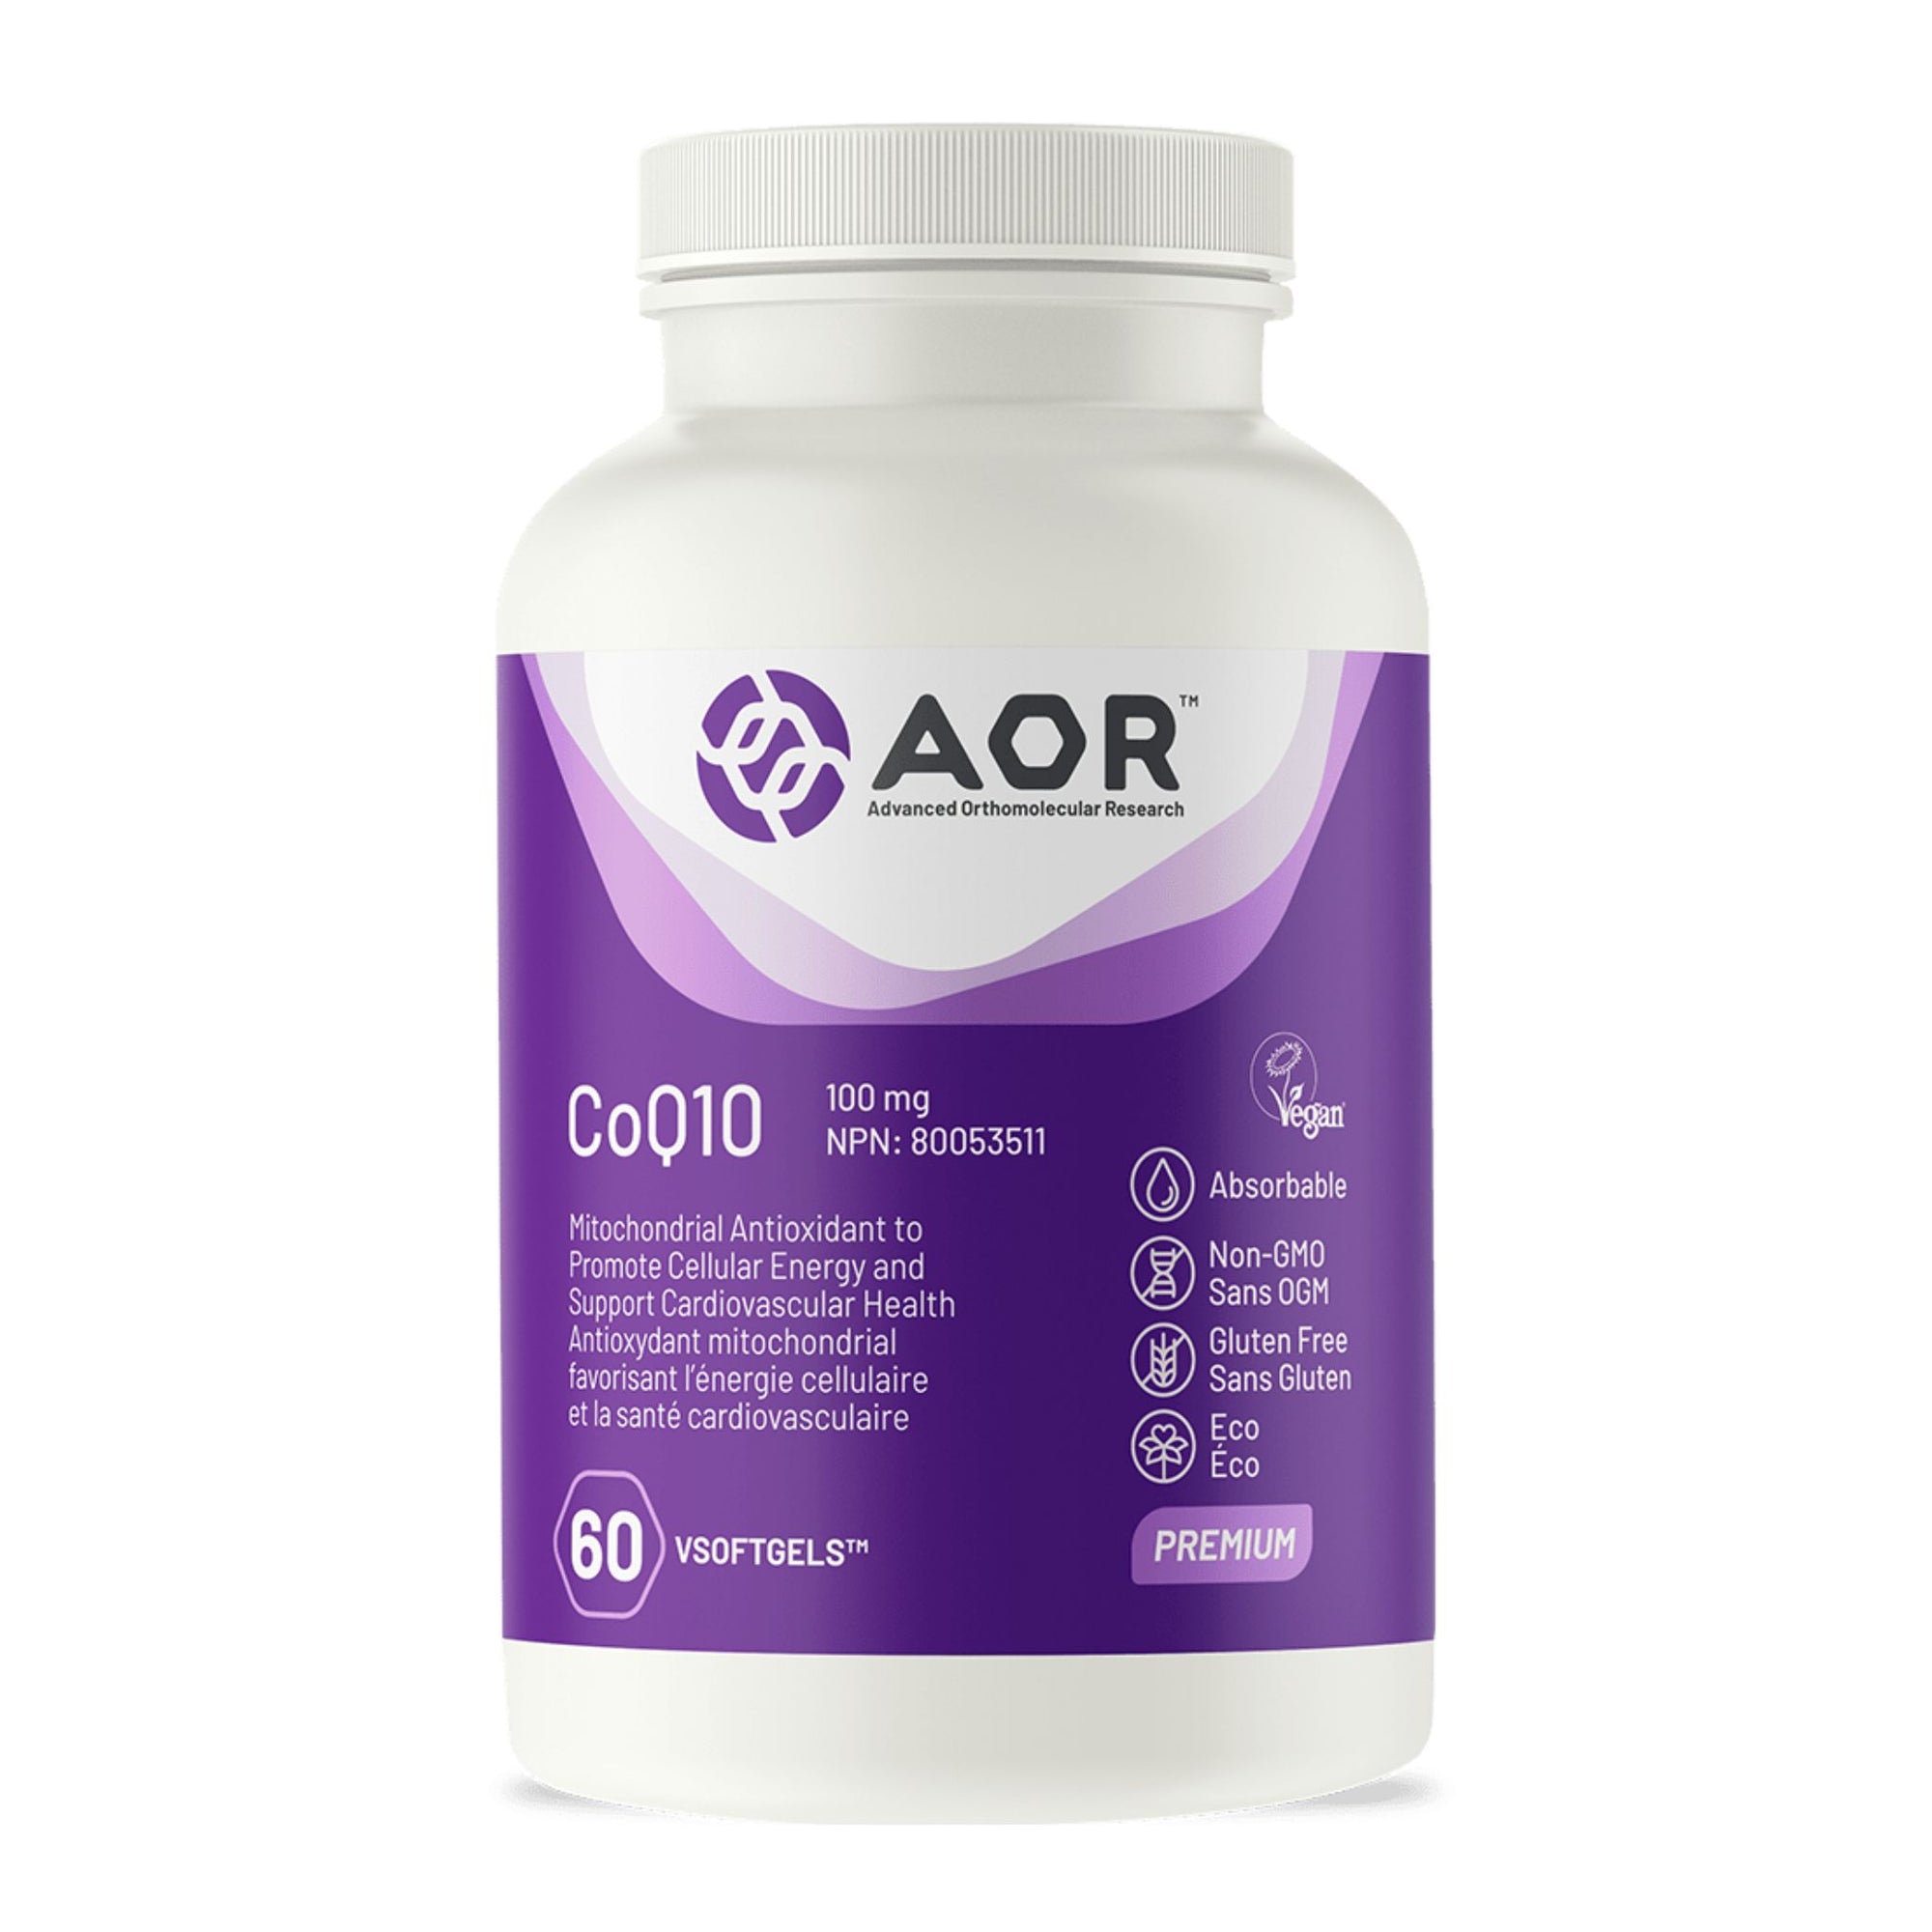 AOR CoQ10 60 Vegan Softgels - Mitochondrial Antioxidant to Promote Cellular Energy and Support Cardiovascular Health 